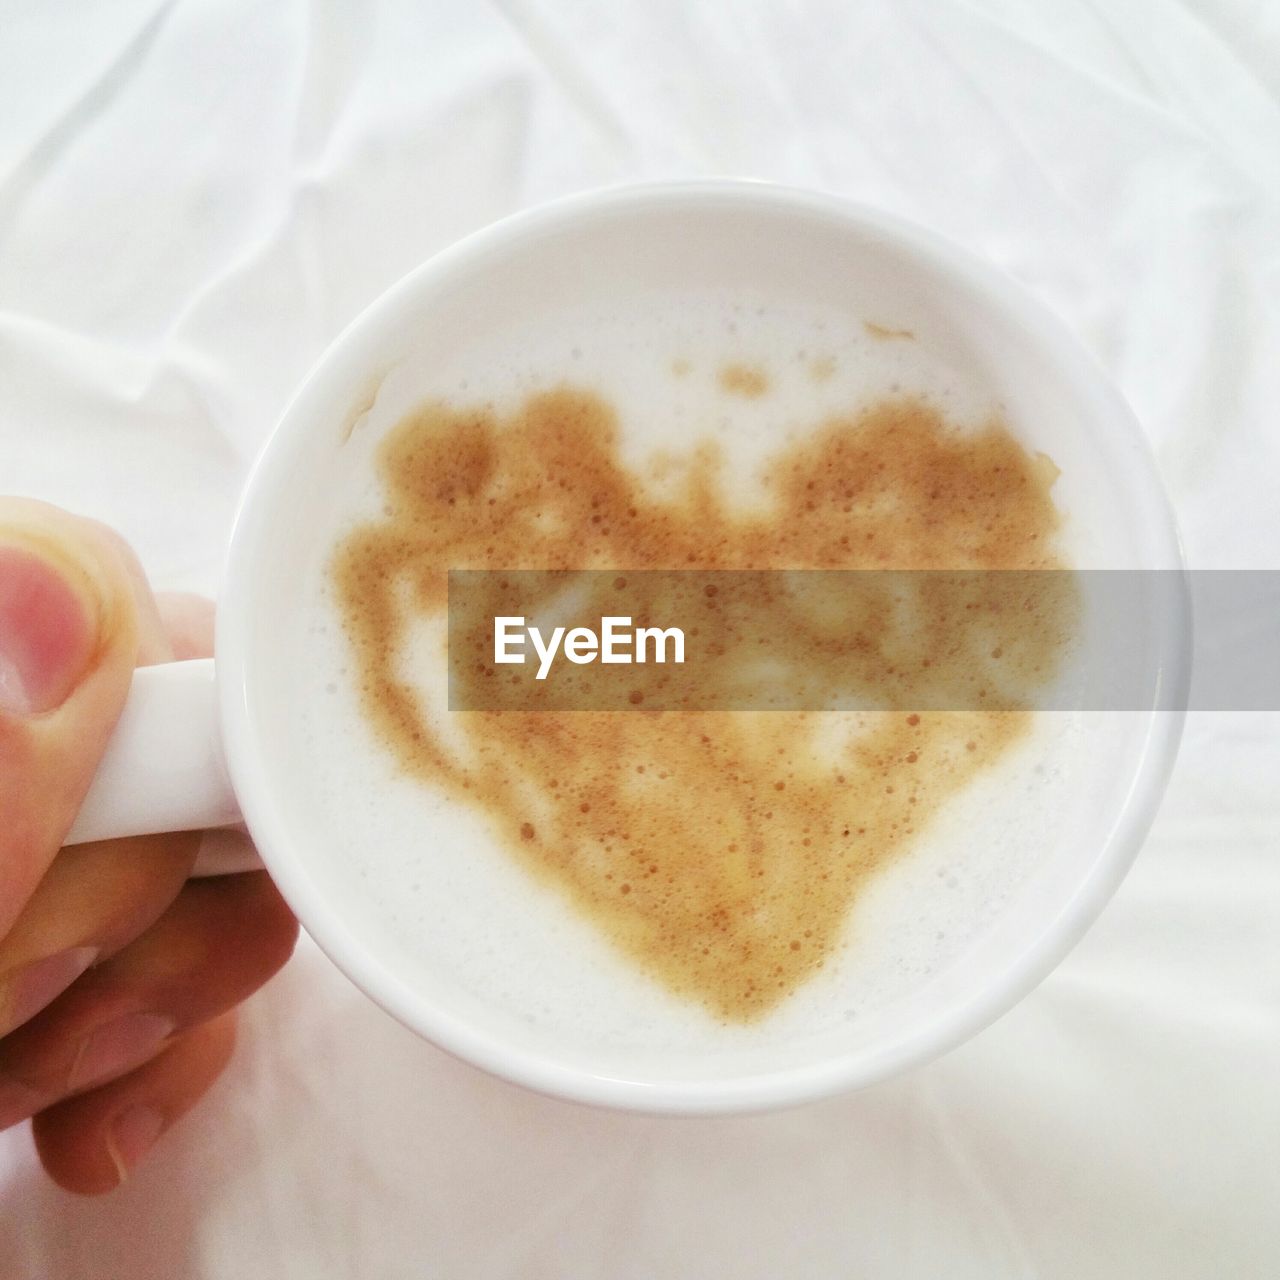 Cropped image of hand holding espresso coffee cup